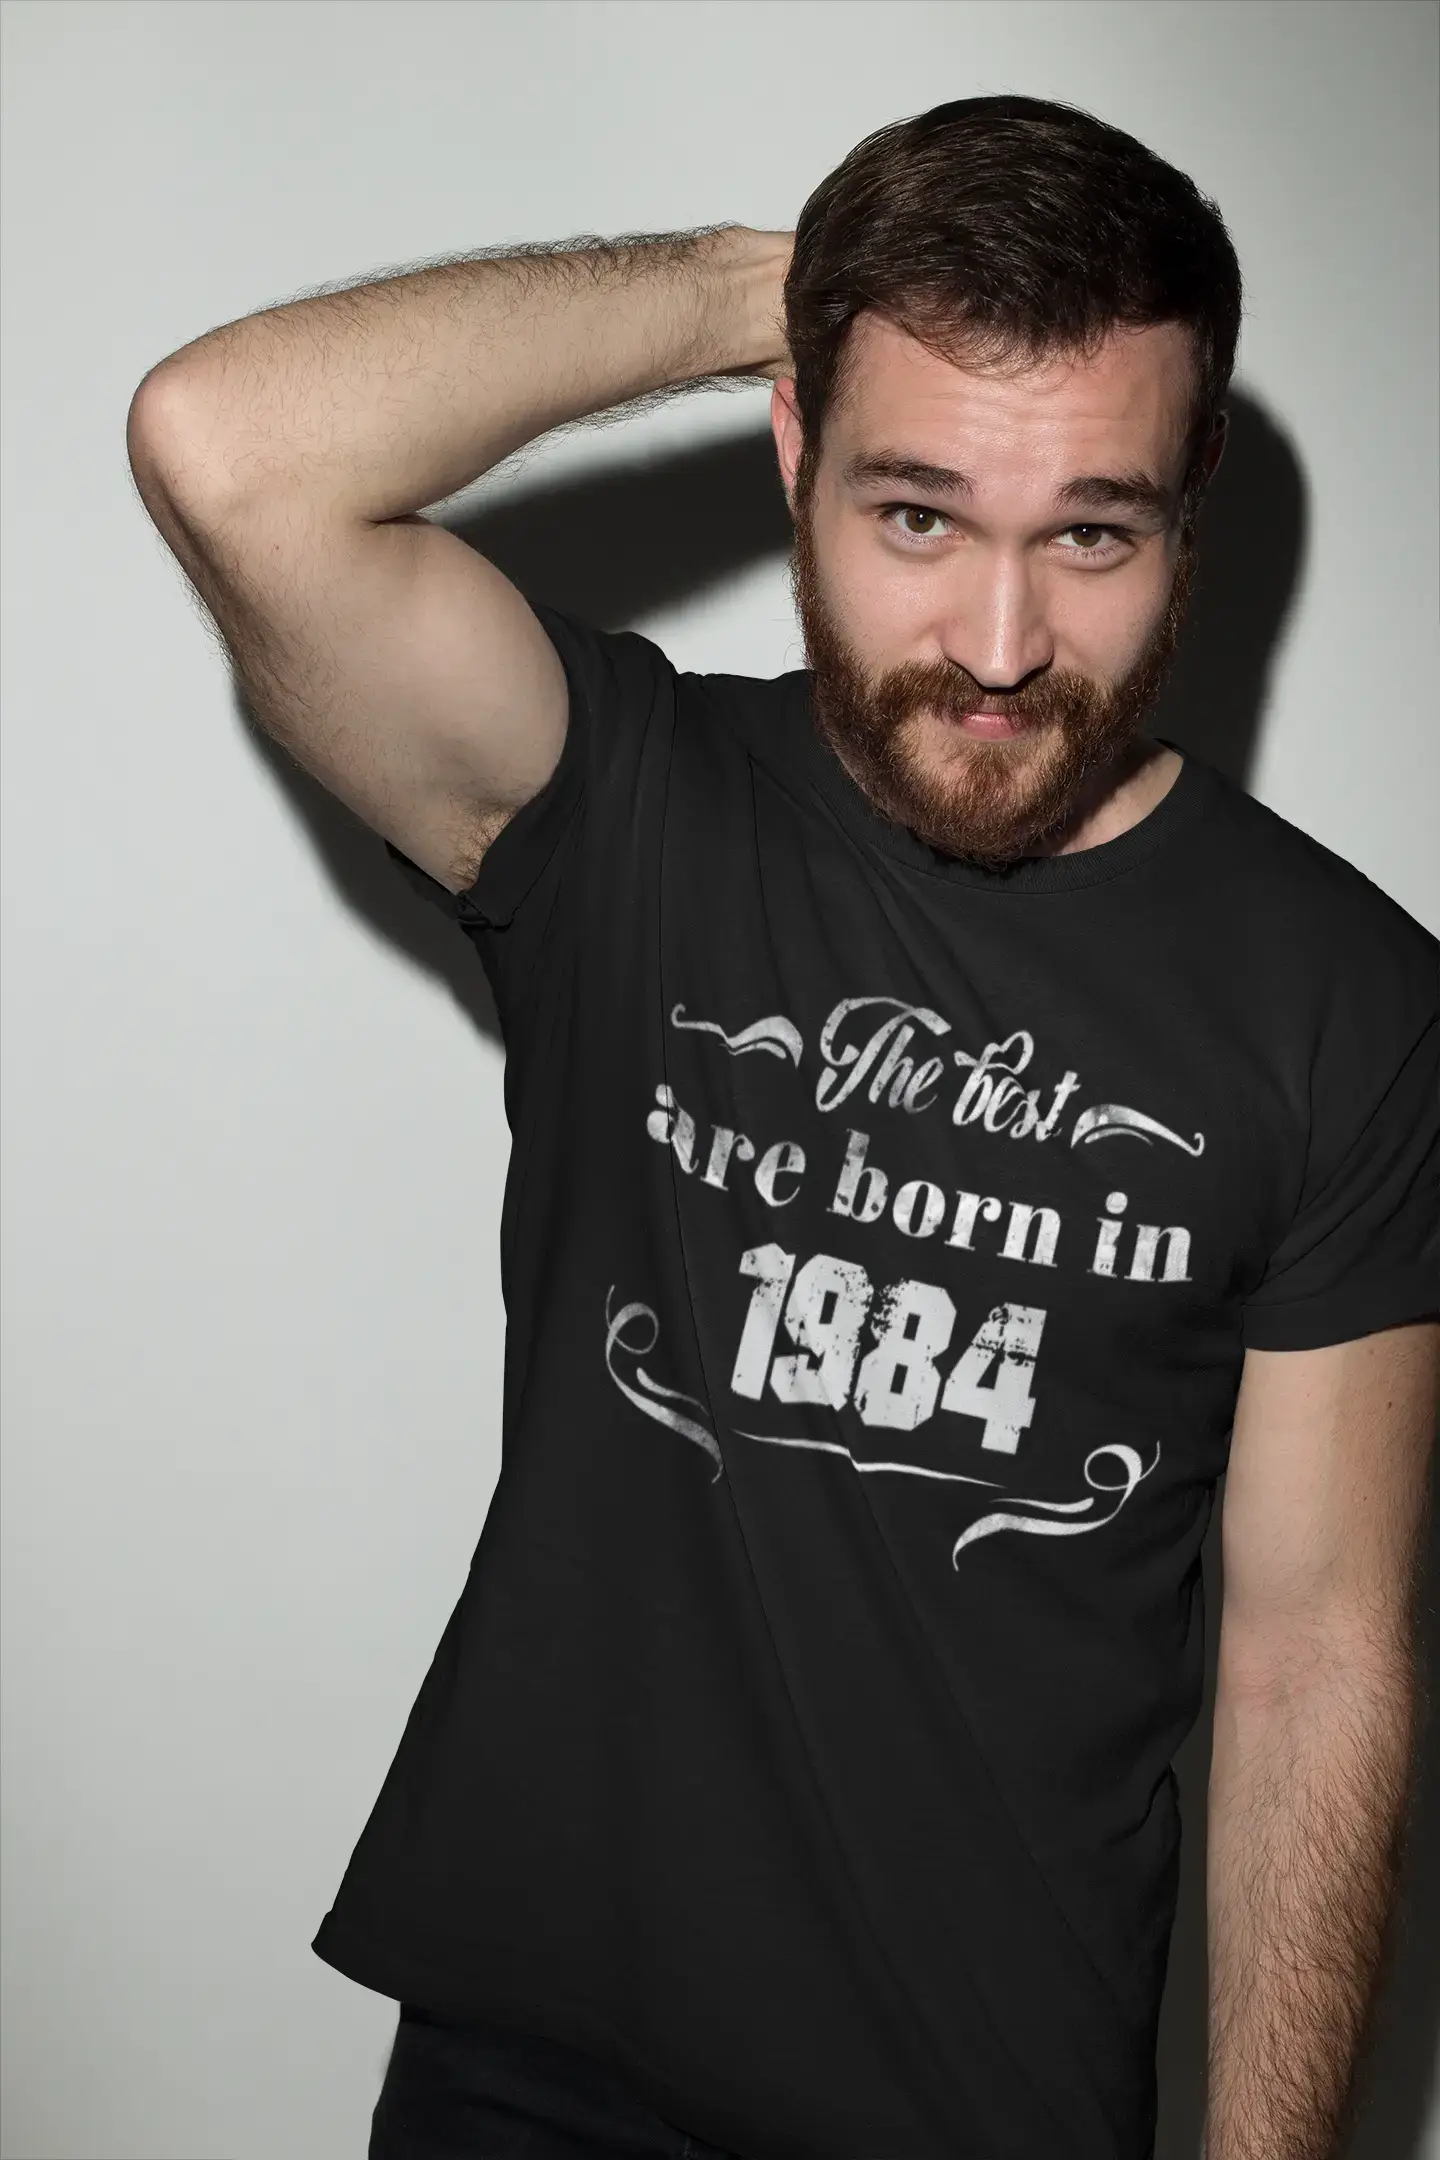 The Best are Born in 1984 Men's T-shirt Black Birthday Gift 00397